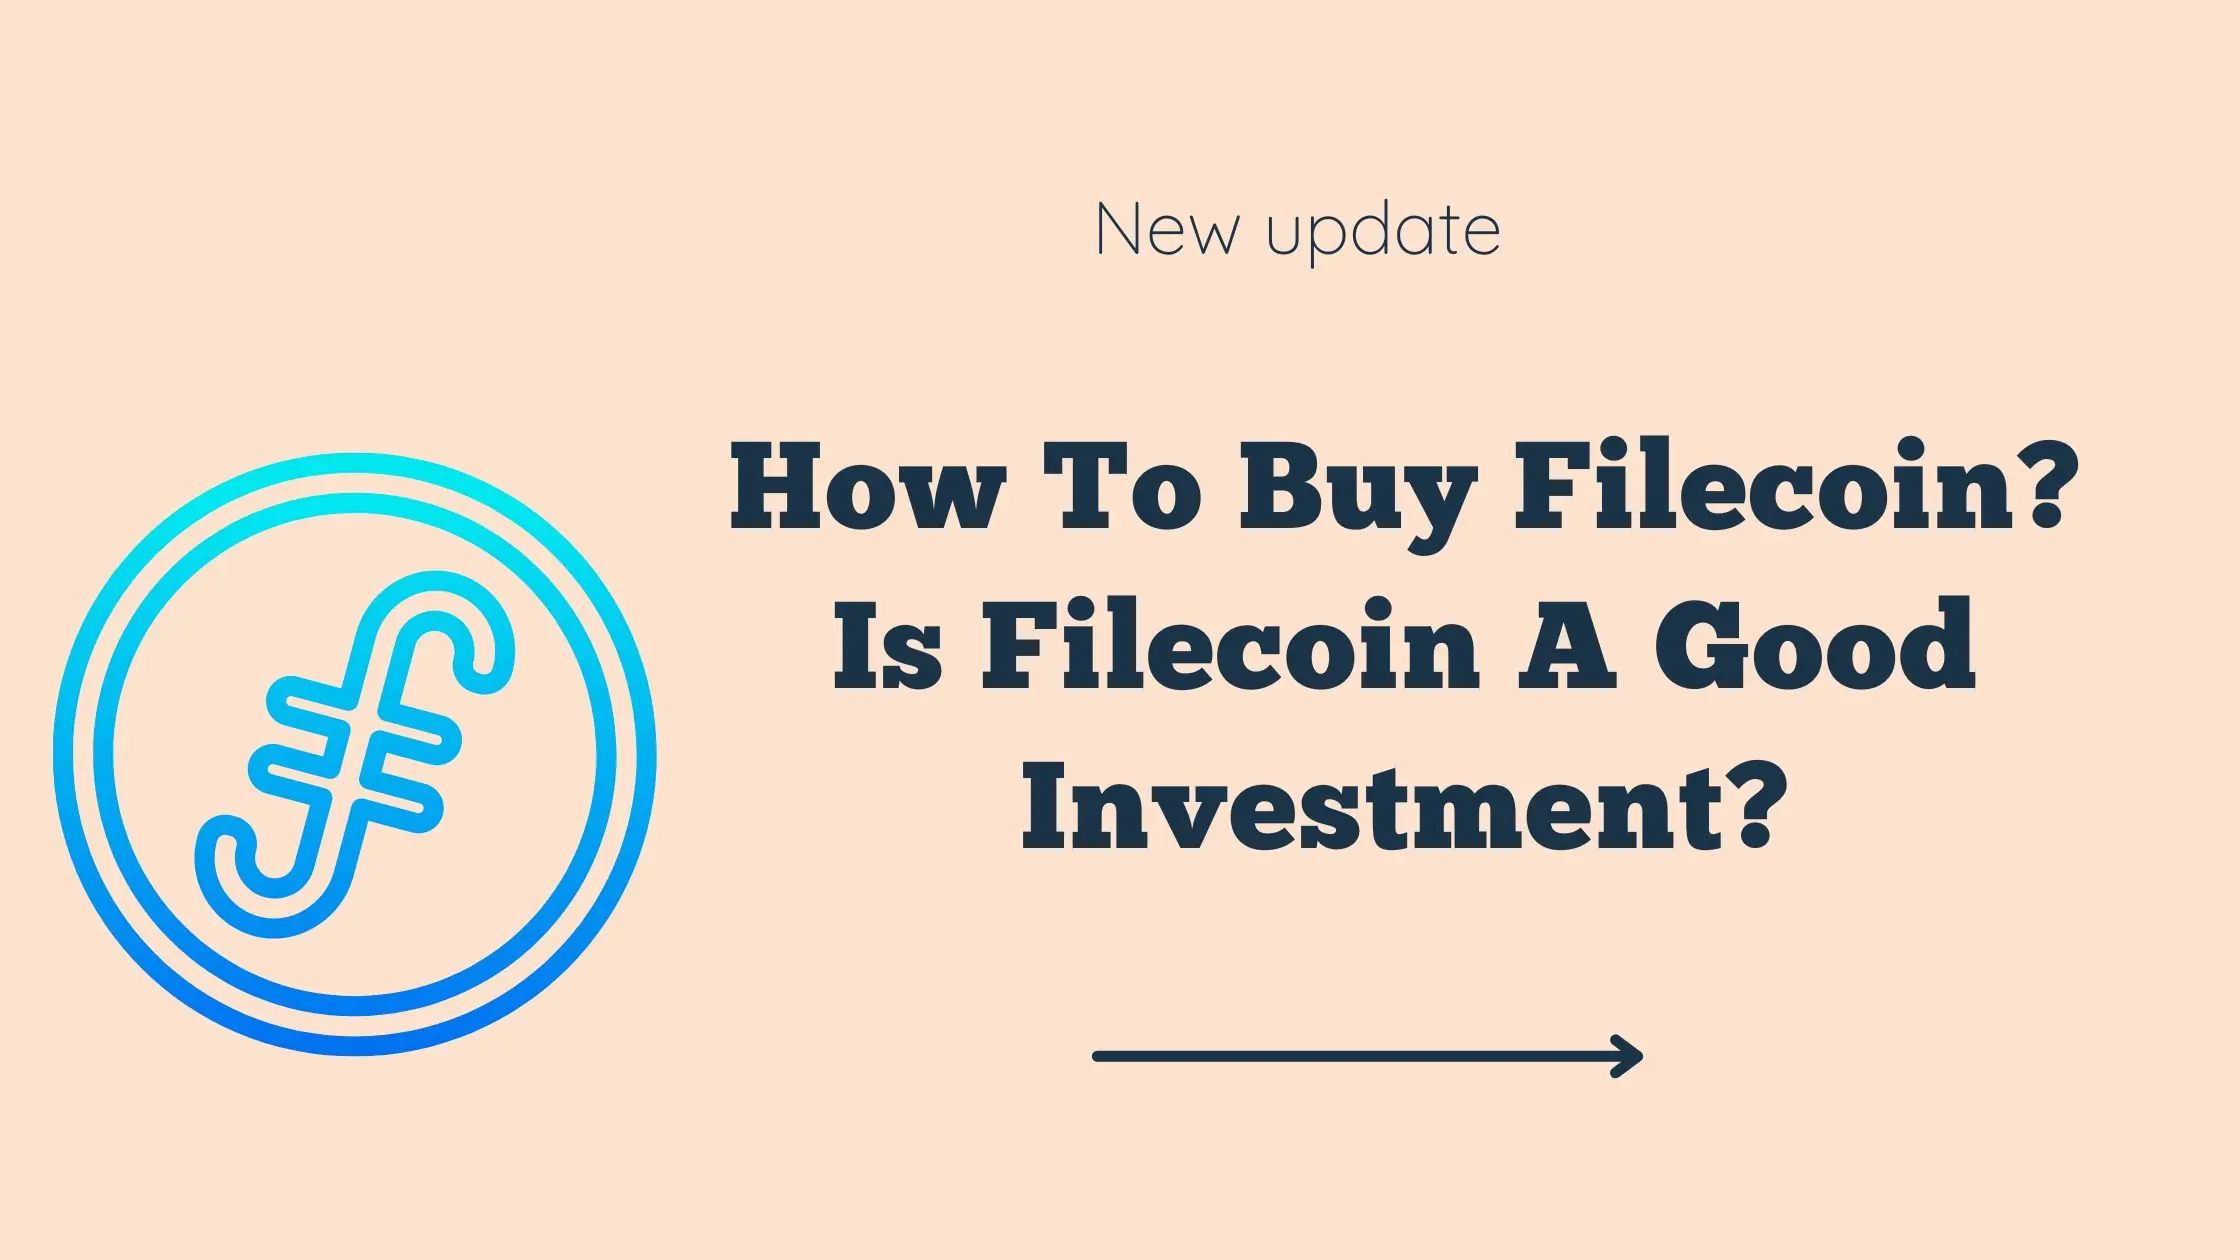 How To Buy Filecoin? Is Filecoin A Good Investment?